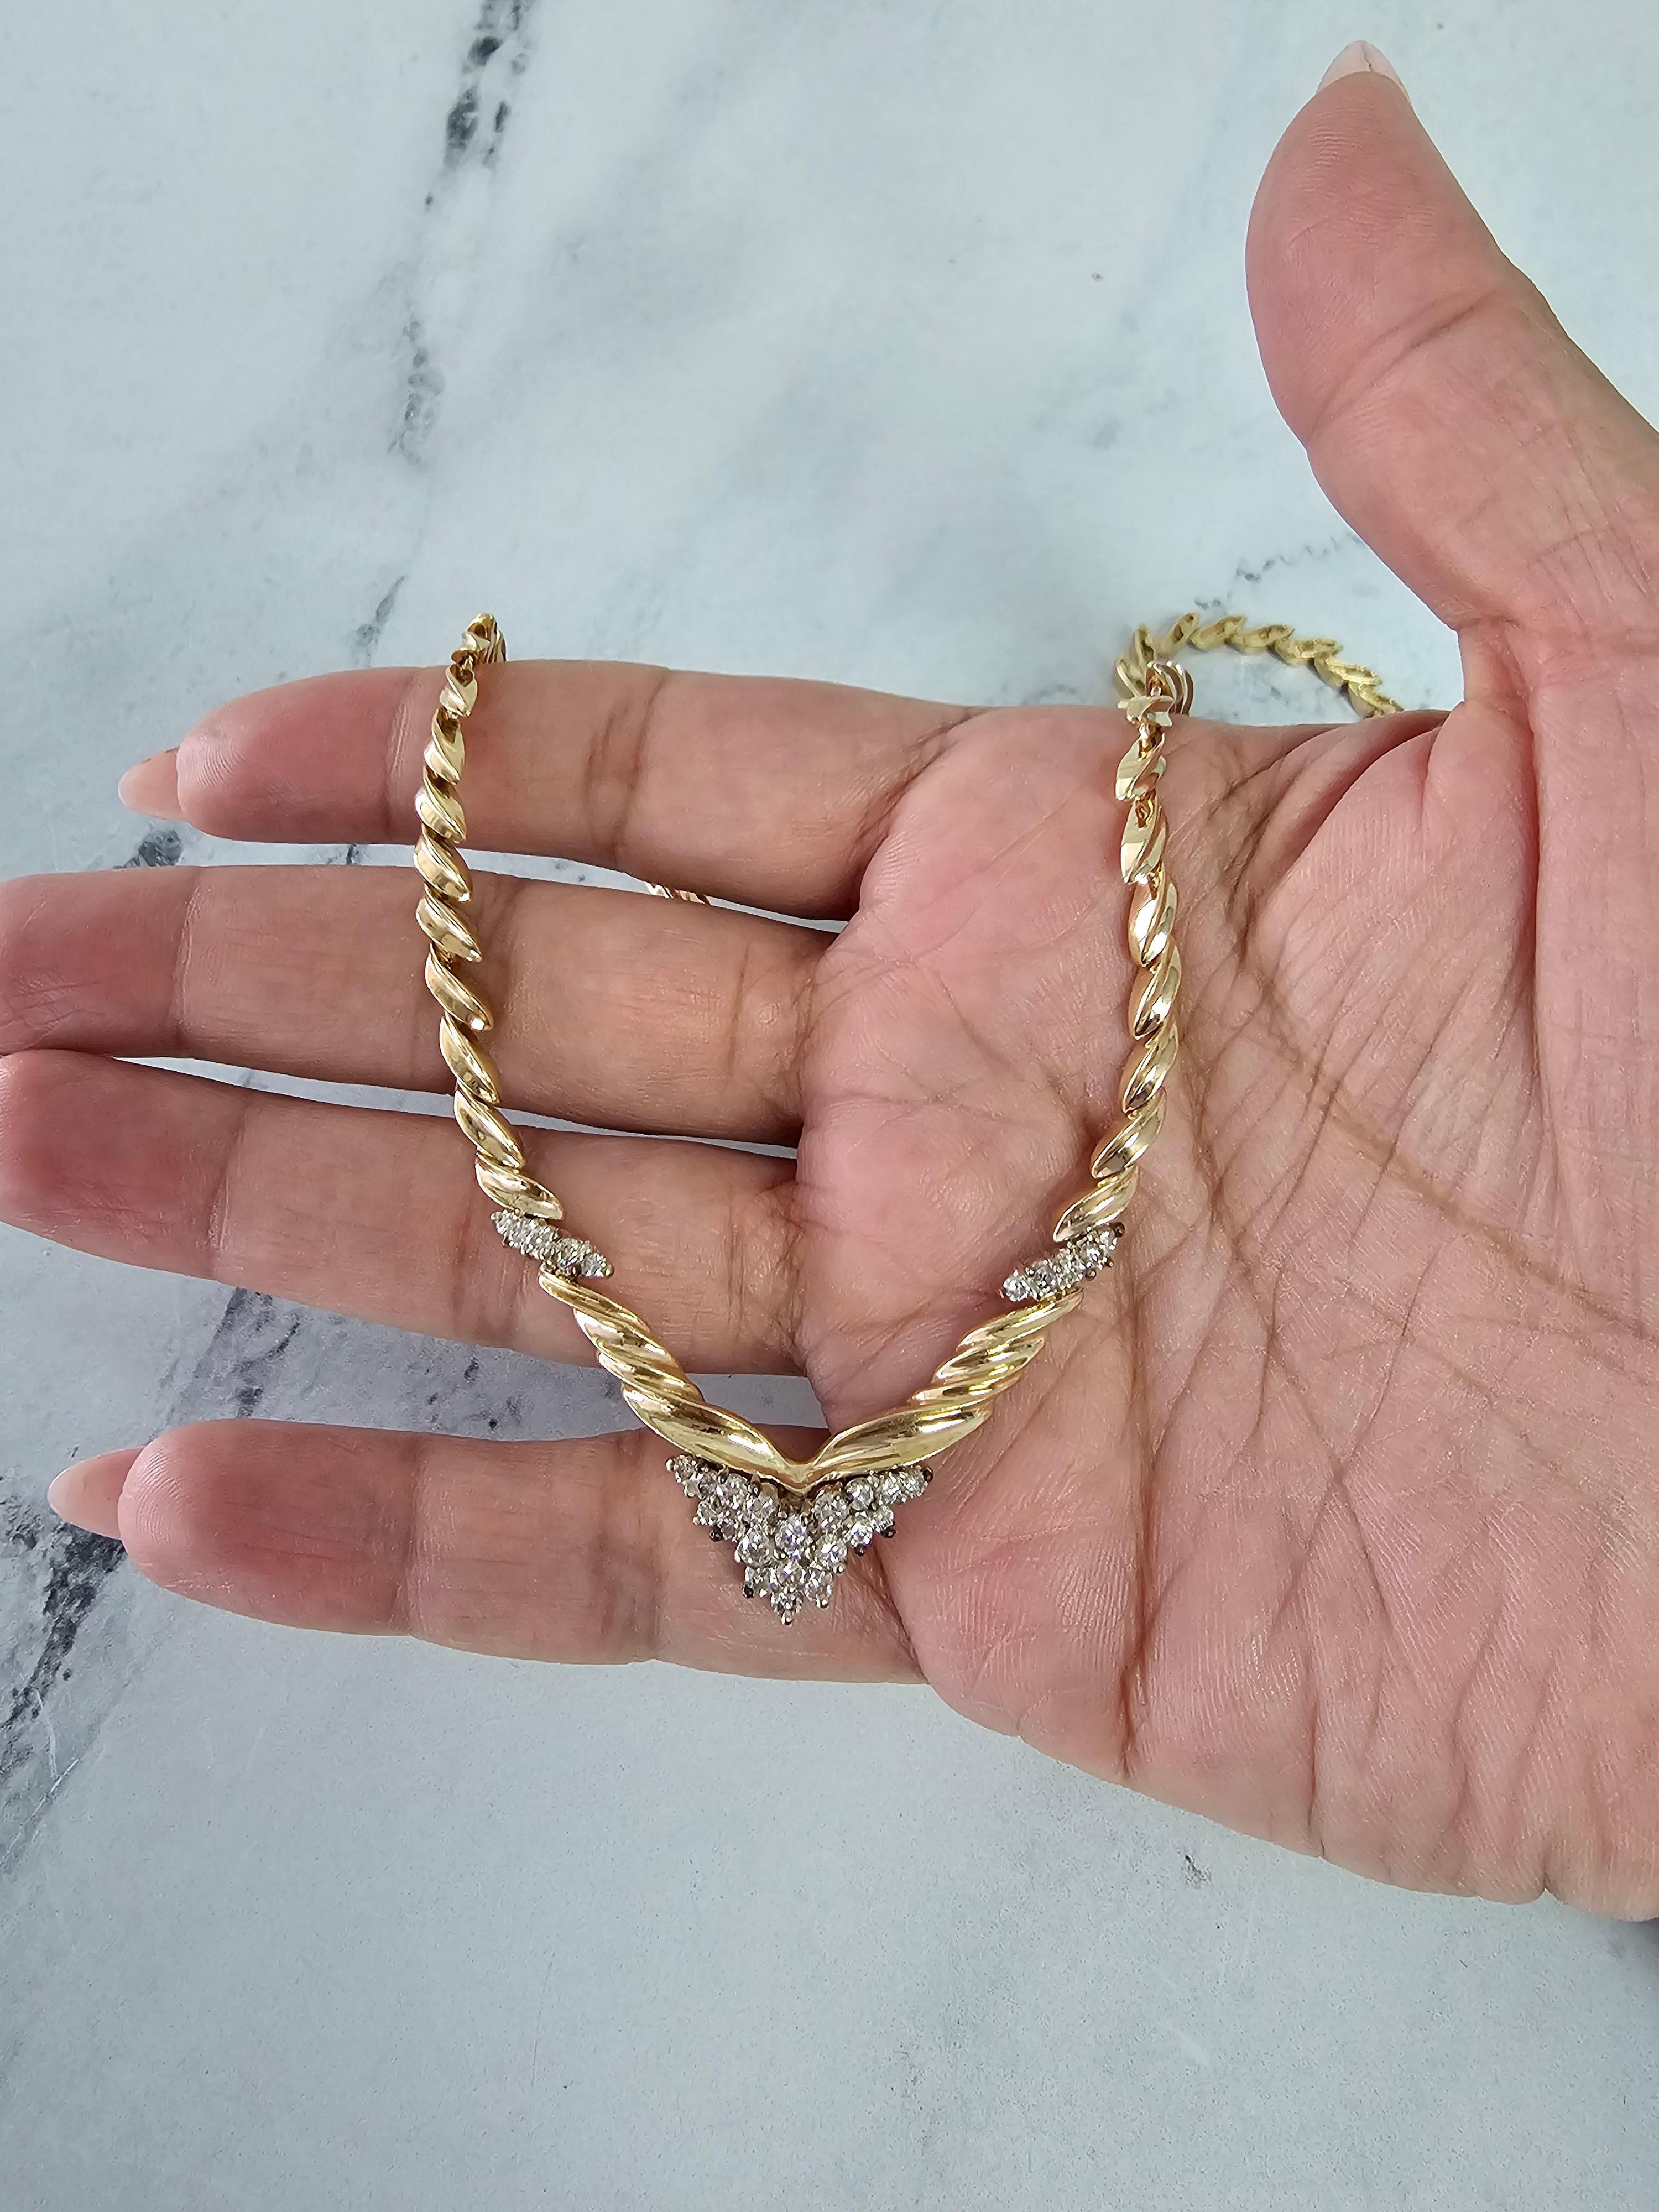 ♥ Product Summary ♥

Main Stone: Diamond
Approx. Carat Weight: 1.00cttw
Diamond Color: J/K
Diamond Clarity: SI1/SI2
Stone Cut: Round
Material: 14k Two-Toned Gold
Dimensions: 38mm x 56mm
Weight: 31 grams
Length: 16 inches